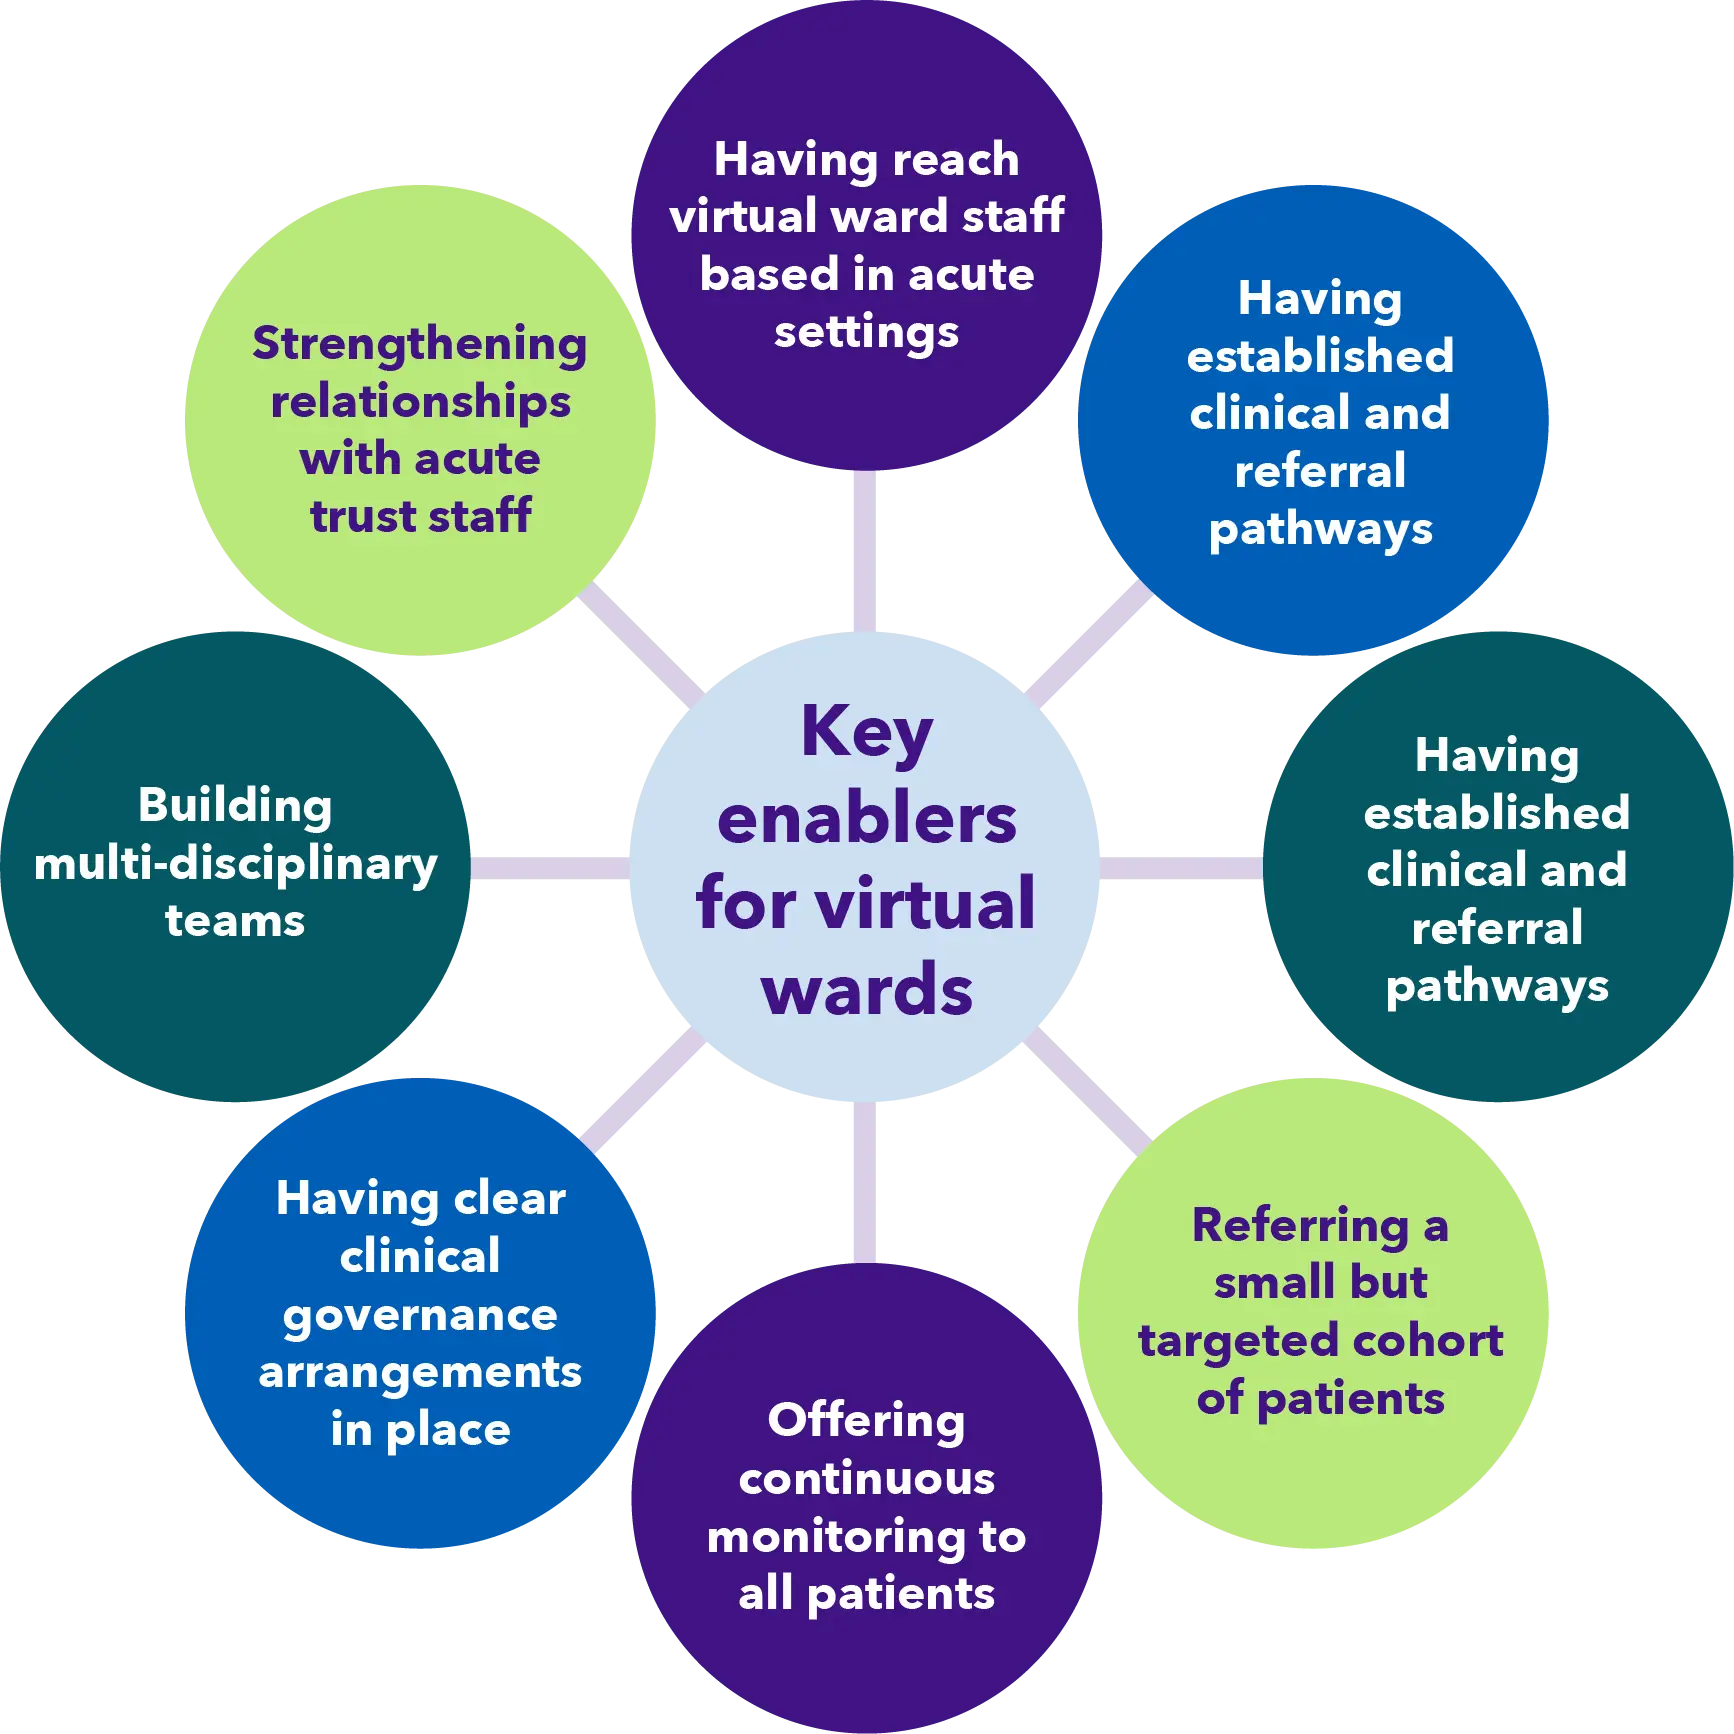 Key enablers for virtual wards